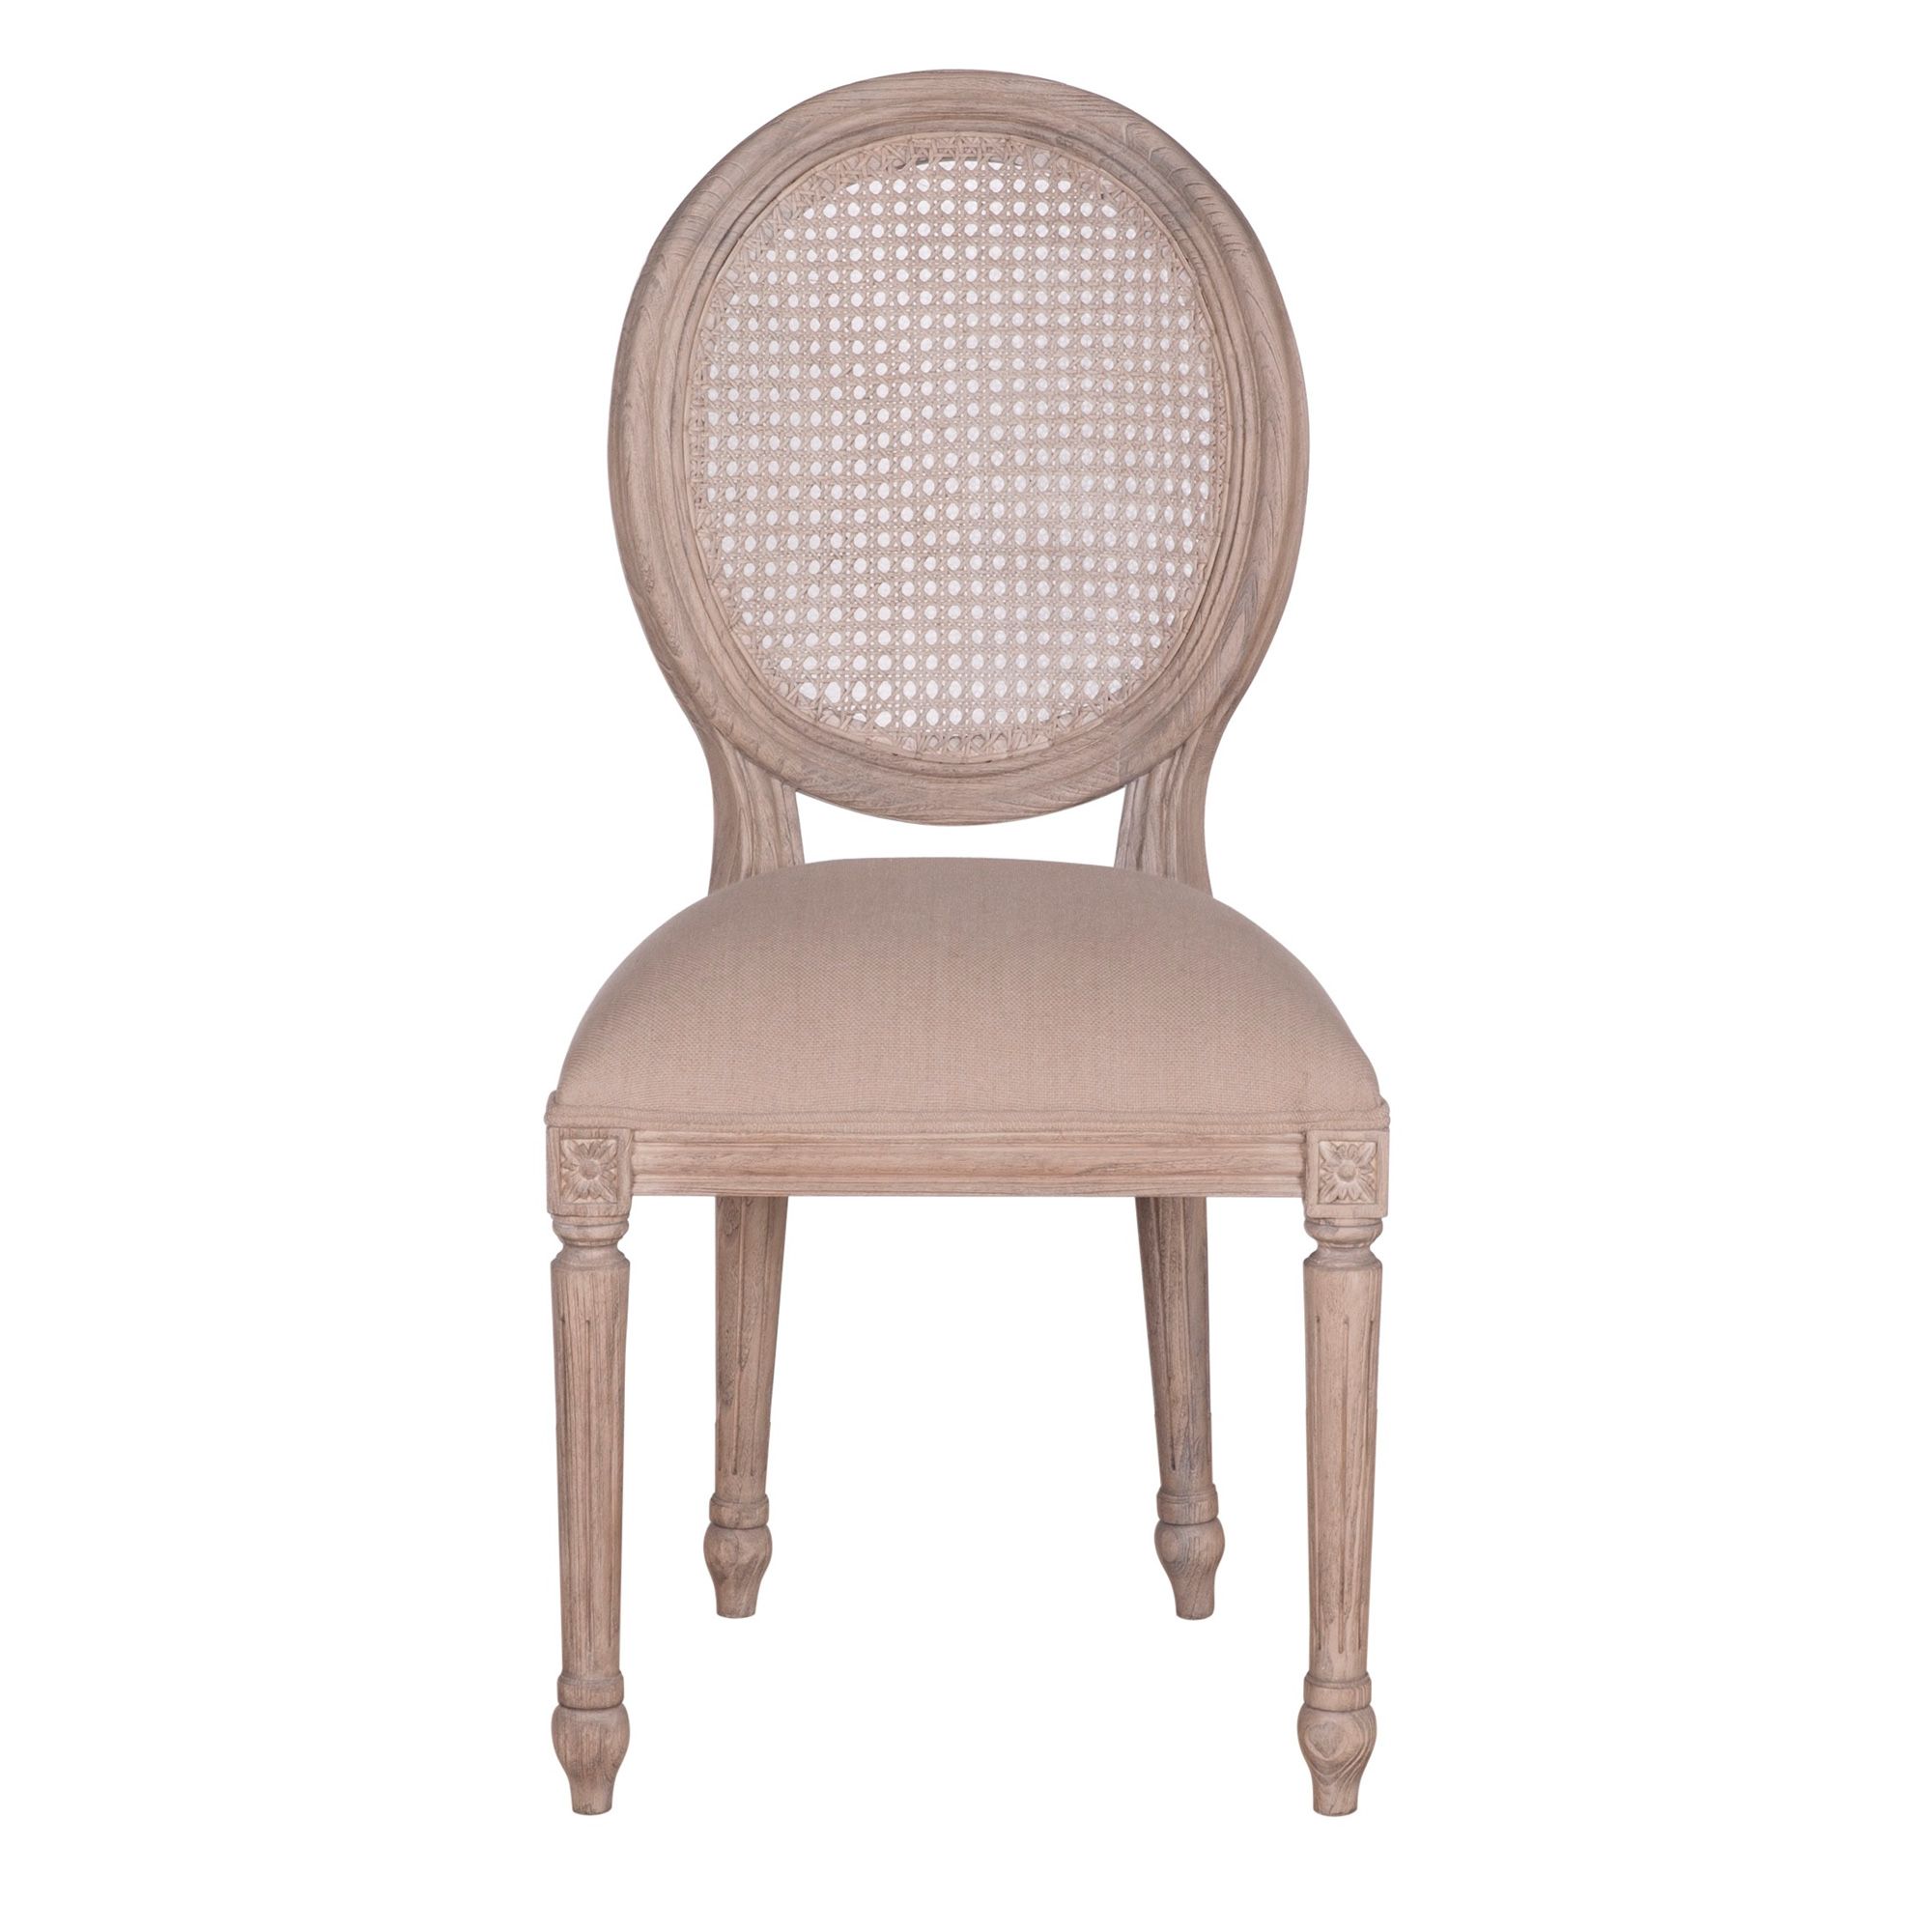 Georgia Rattan Back Dining Chair Rustic Brown With Beige Seat - Dining